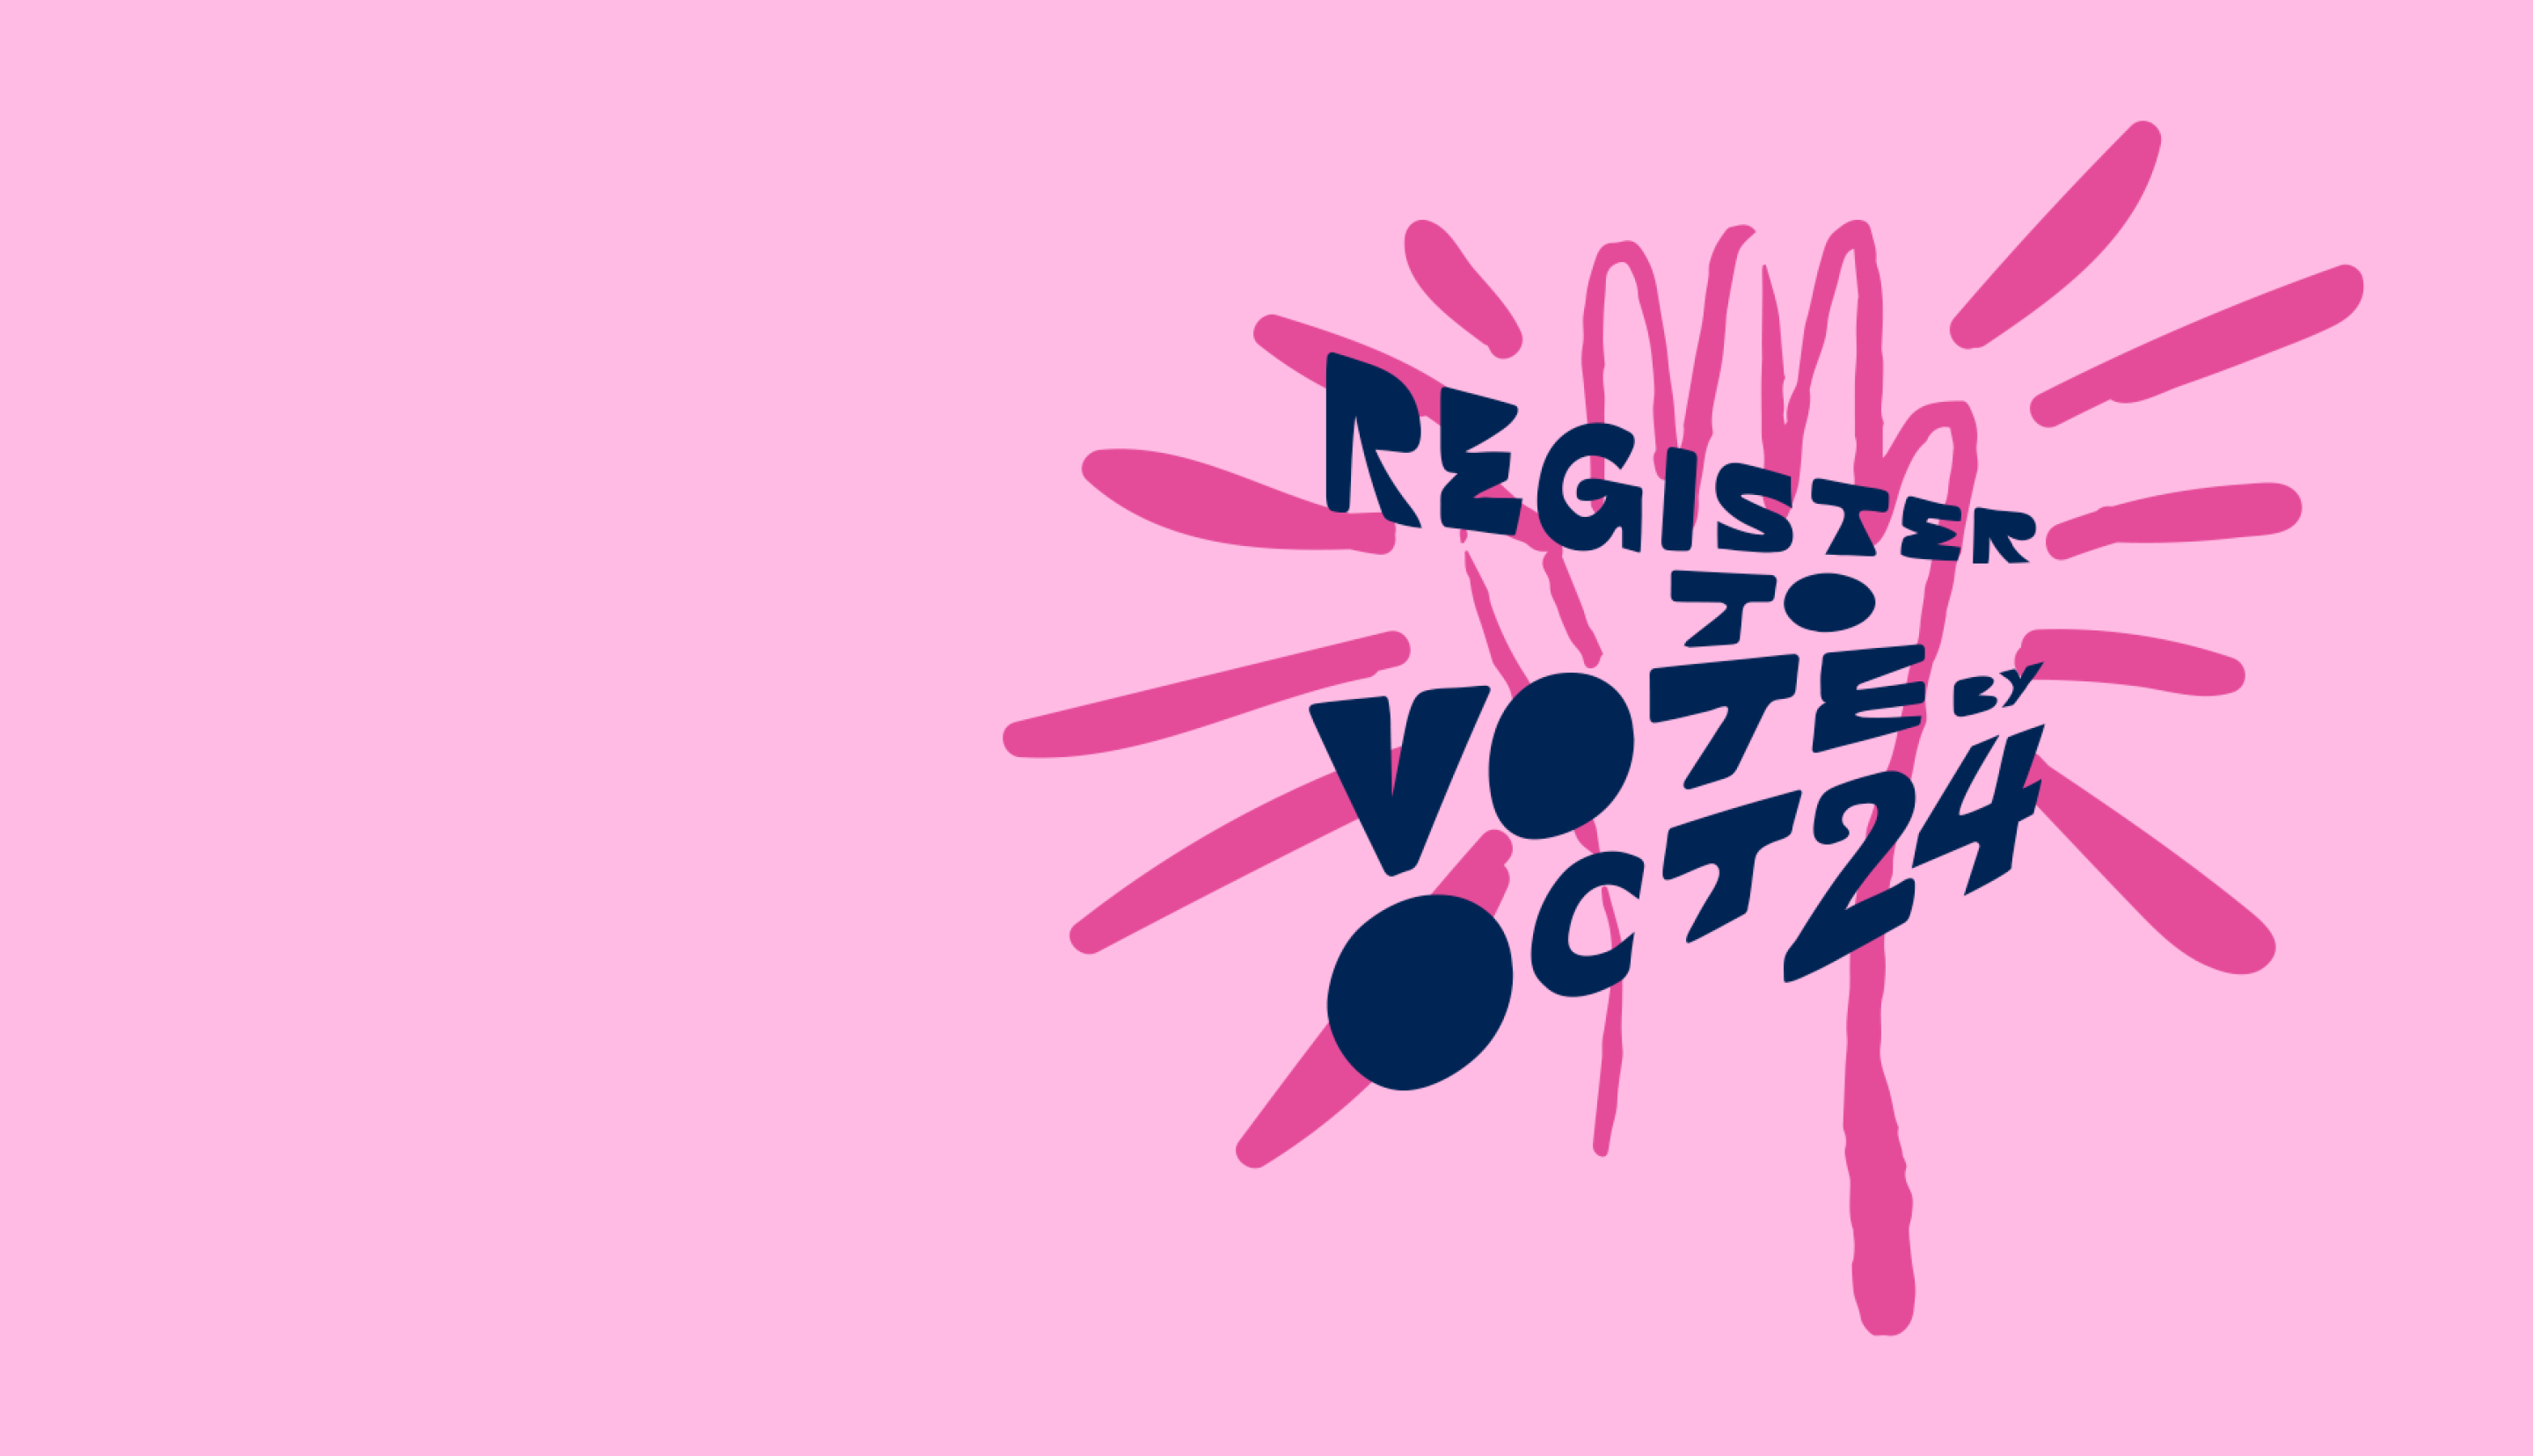 Illustration of a hand with the words "Register to vote Oct 24"